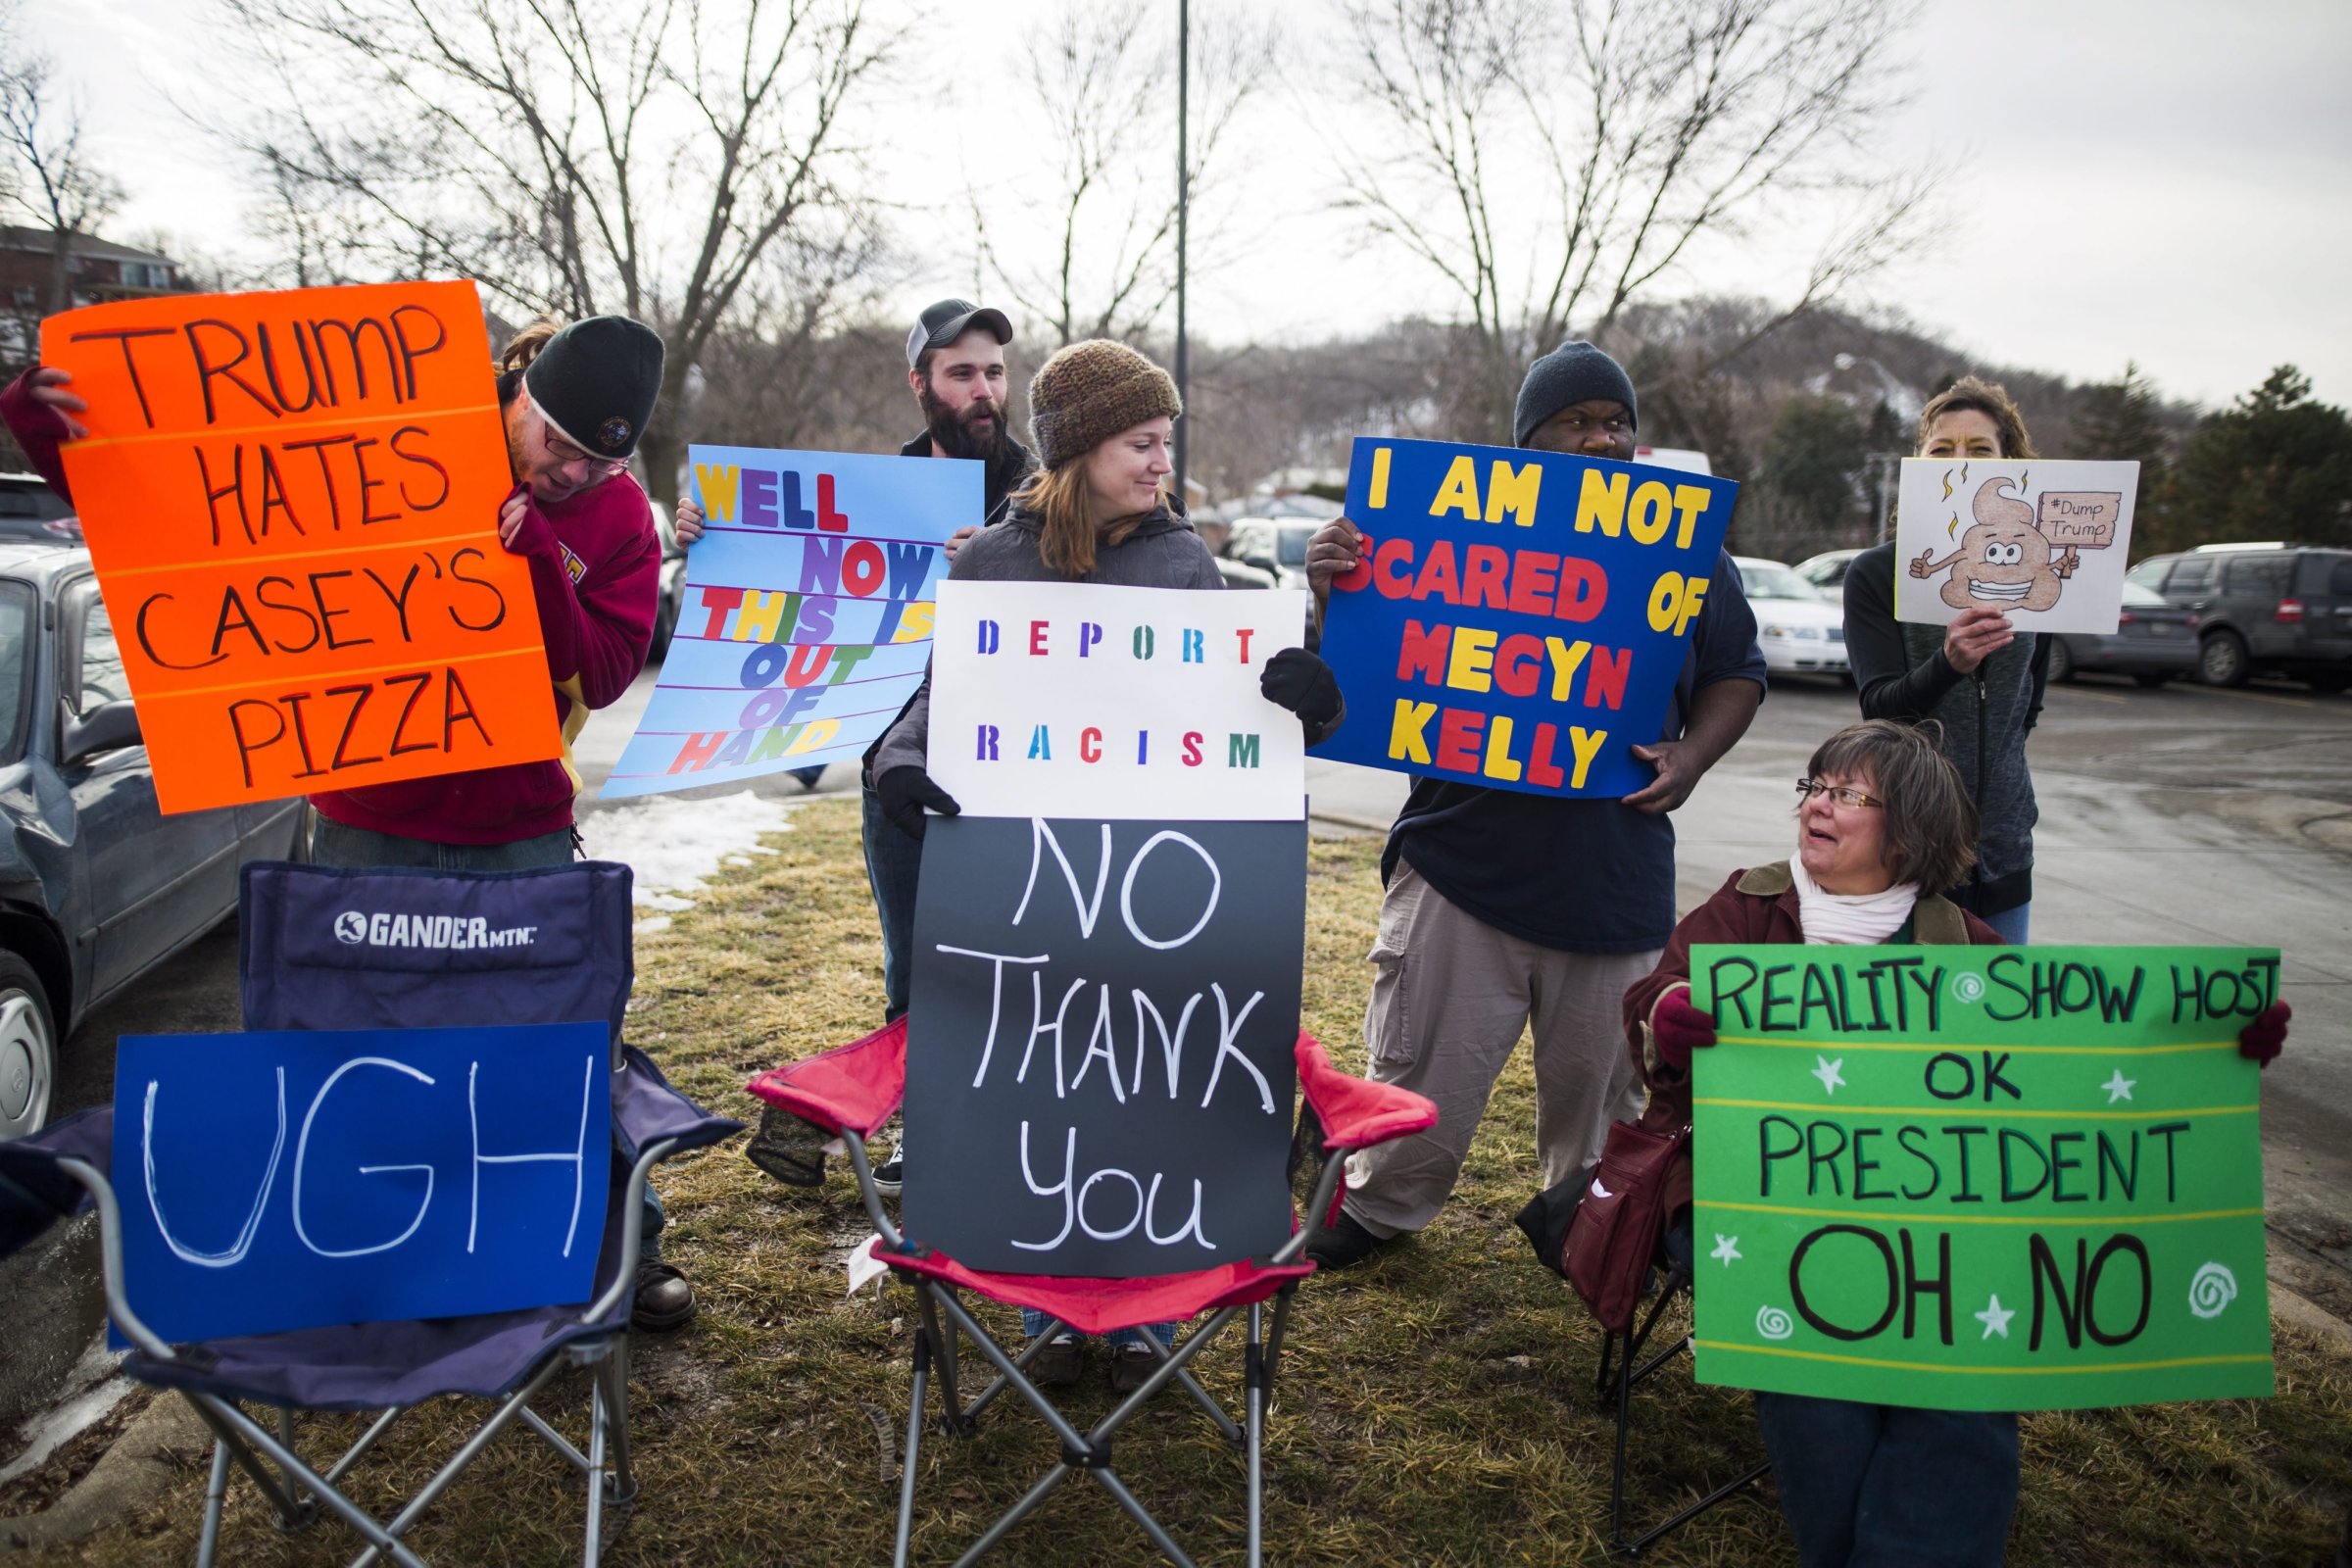 Protestors gather outside a campaign event for Republican presidential candidate Donald Trump at the Gerald Kirn Middle School in Council Bluffs, Iowa on Jan. 31 2016.